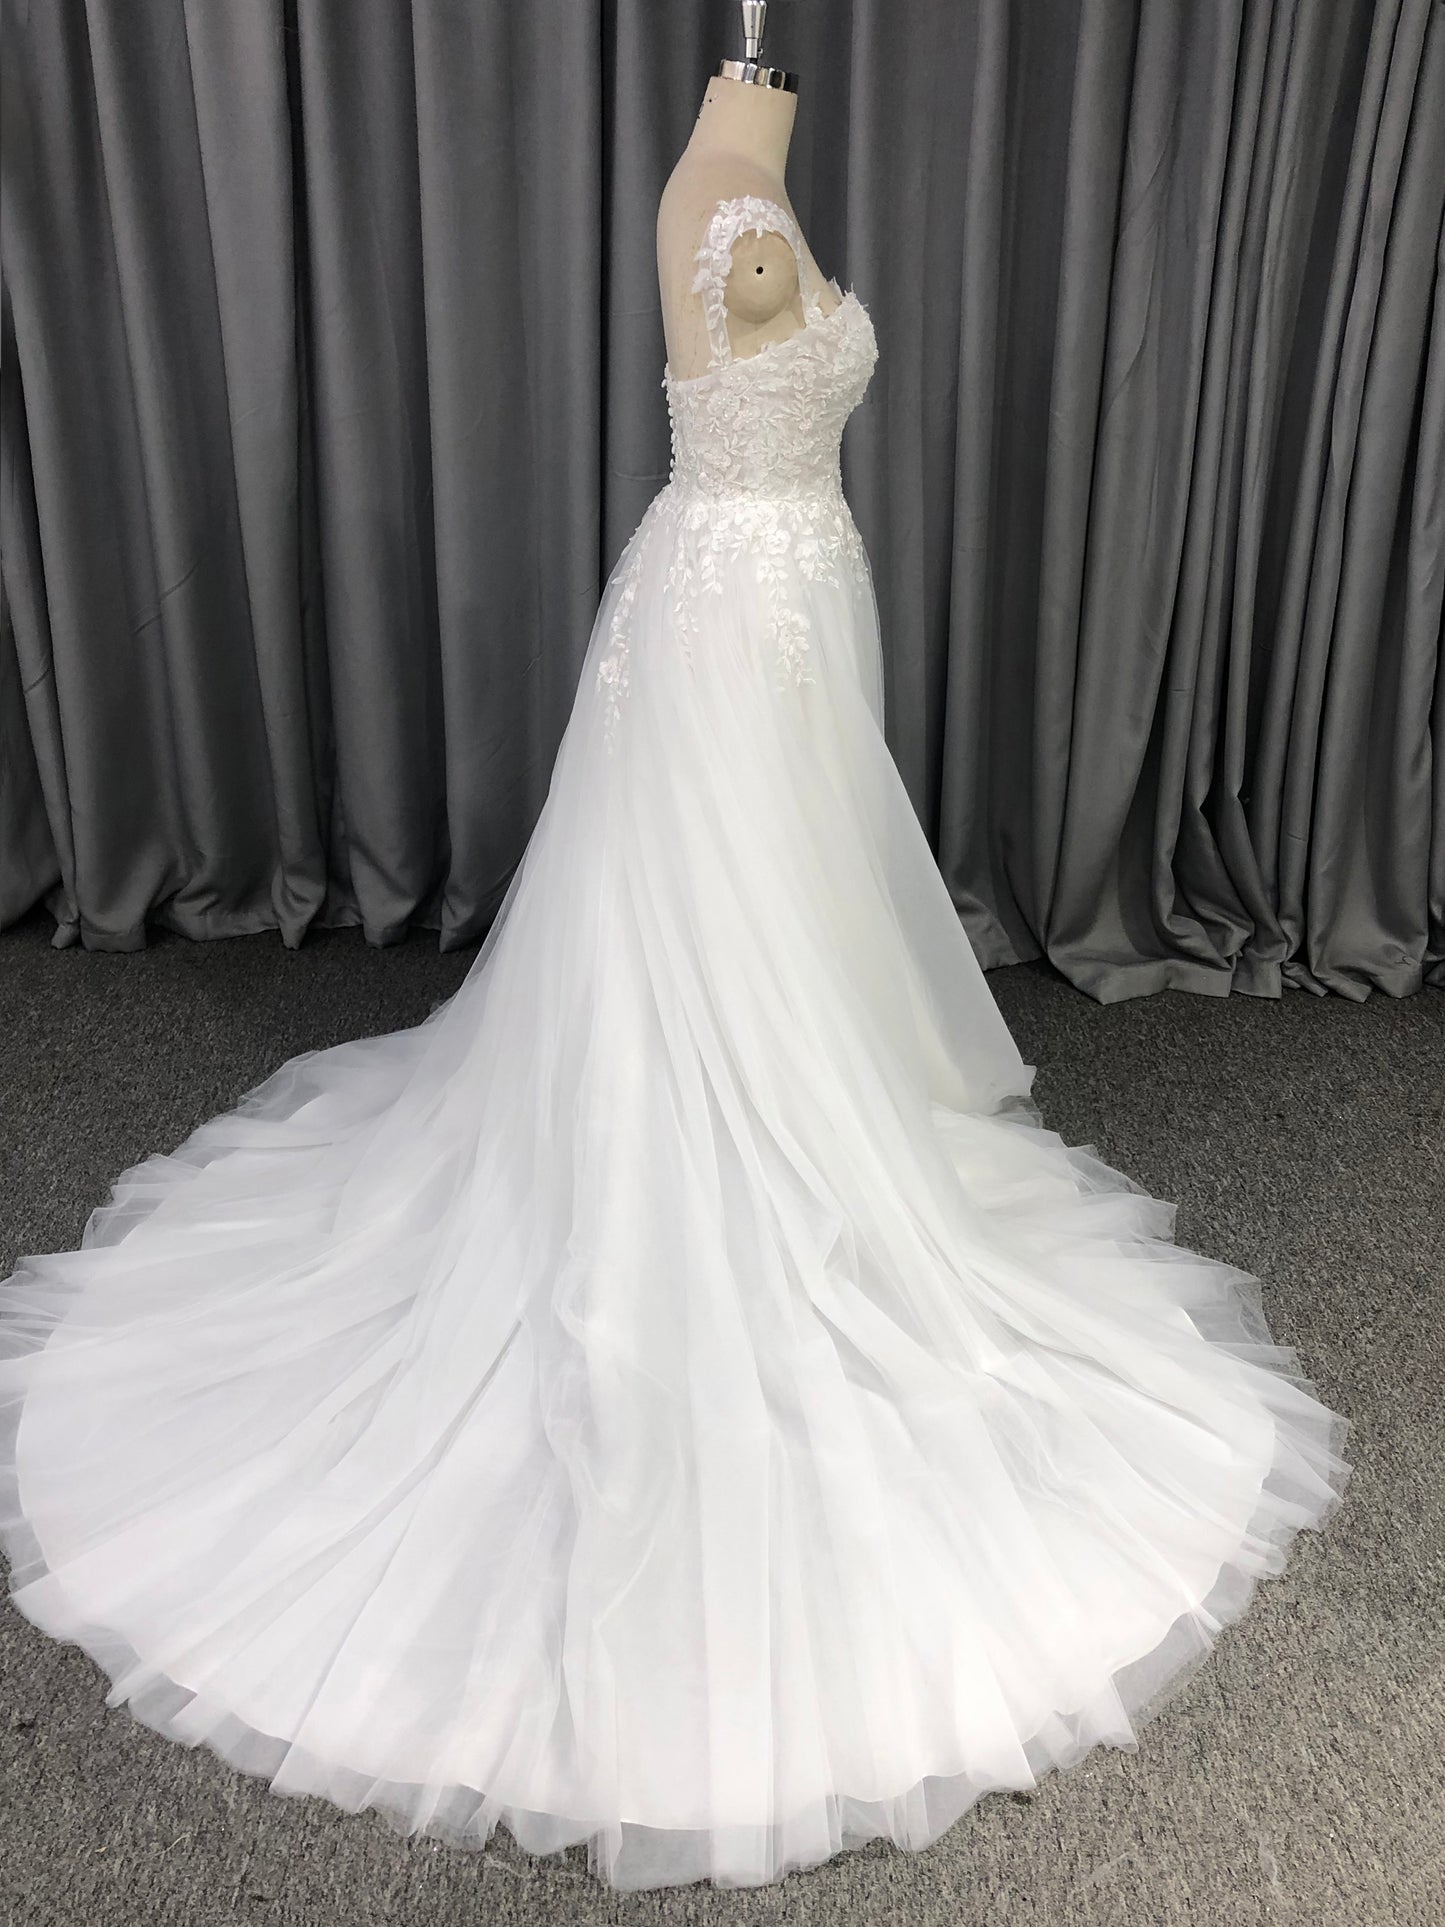 Sweetheart Court Train Tulle Wedding Dresses With Lace